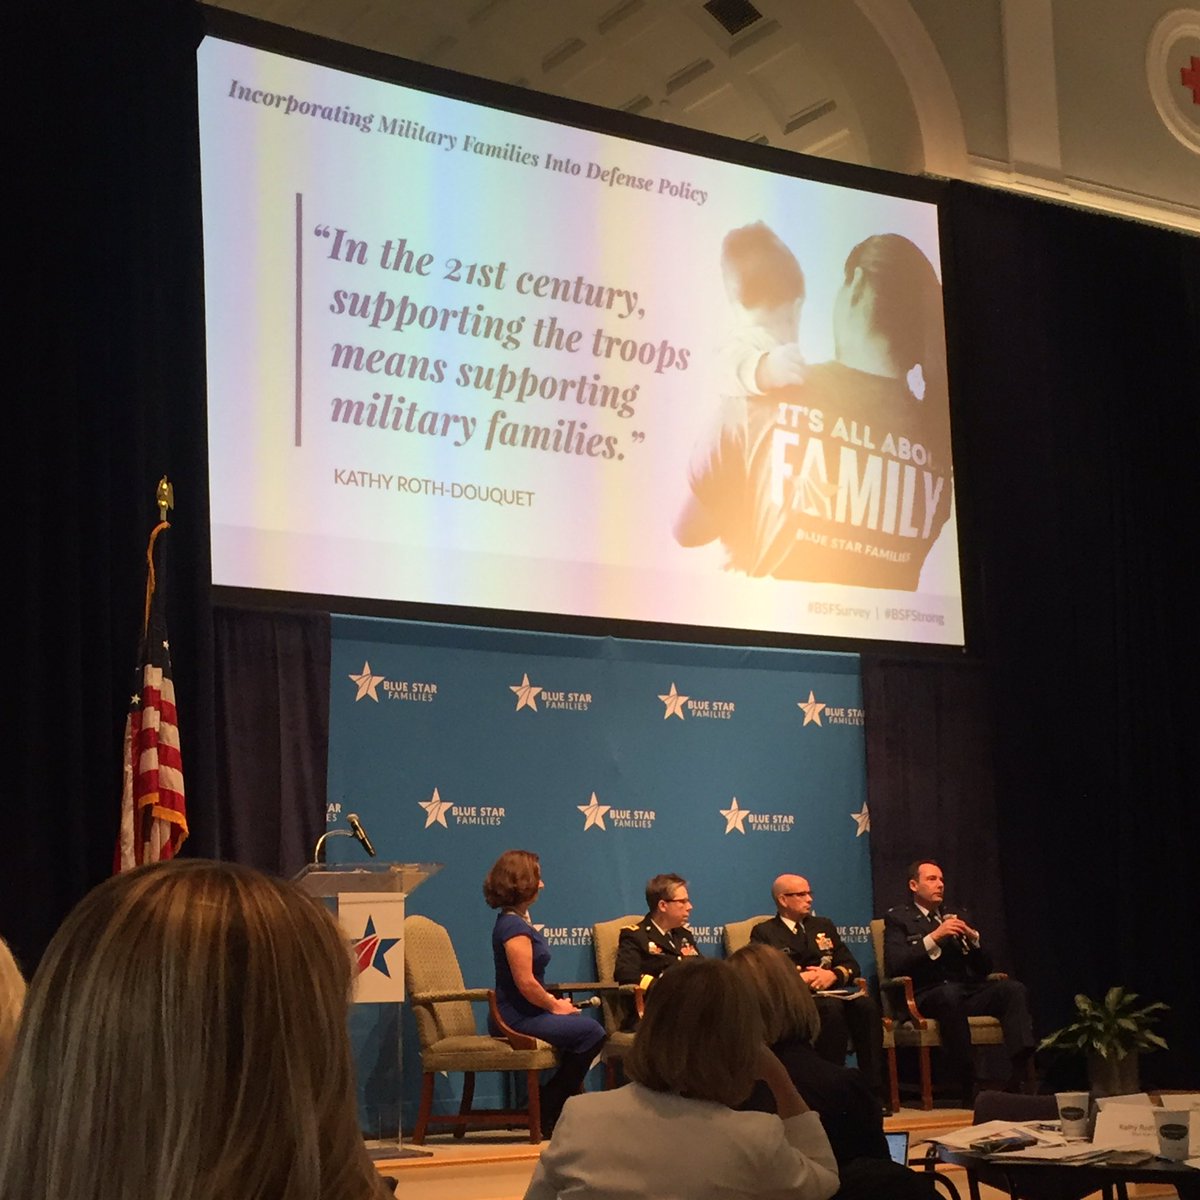 So encouraged by the changes to come for military families! #BSFSurvey #BSFStrong